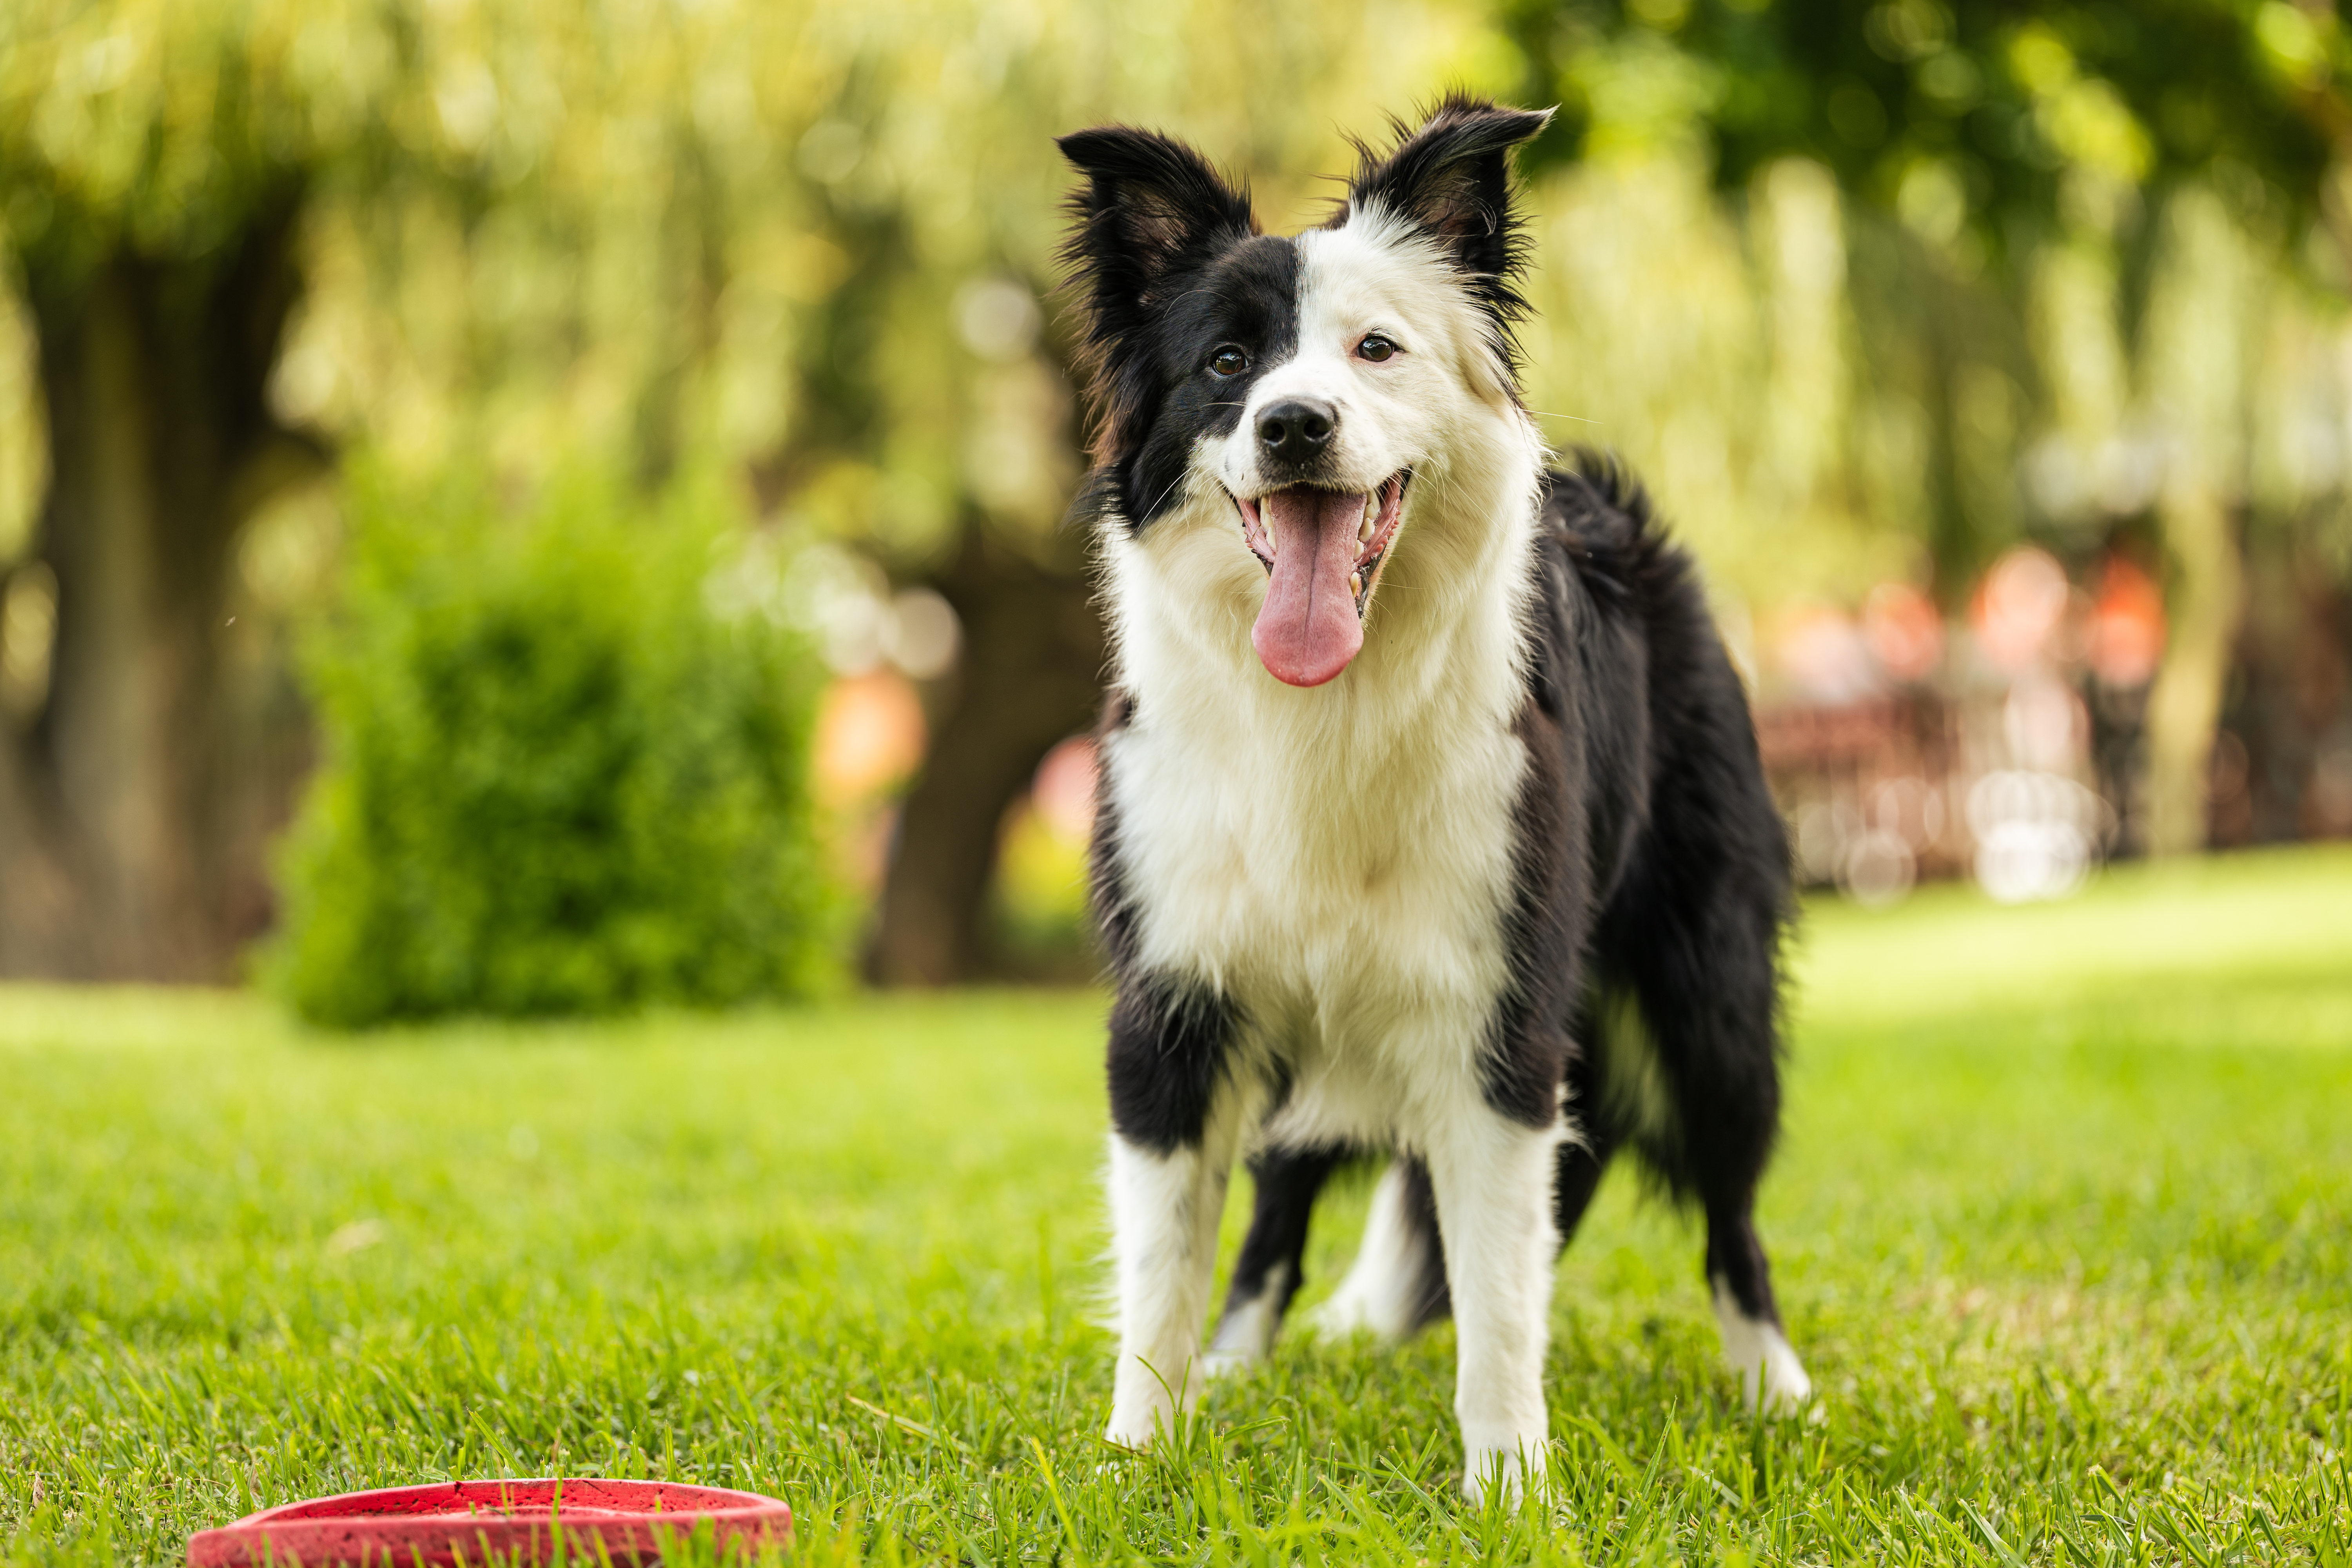 Border Collie breed can be challenging for new pet owners